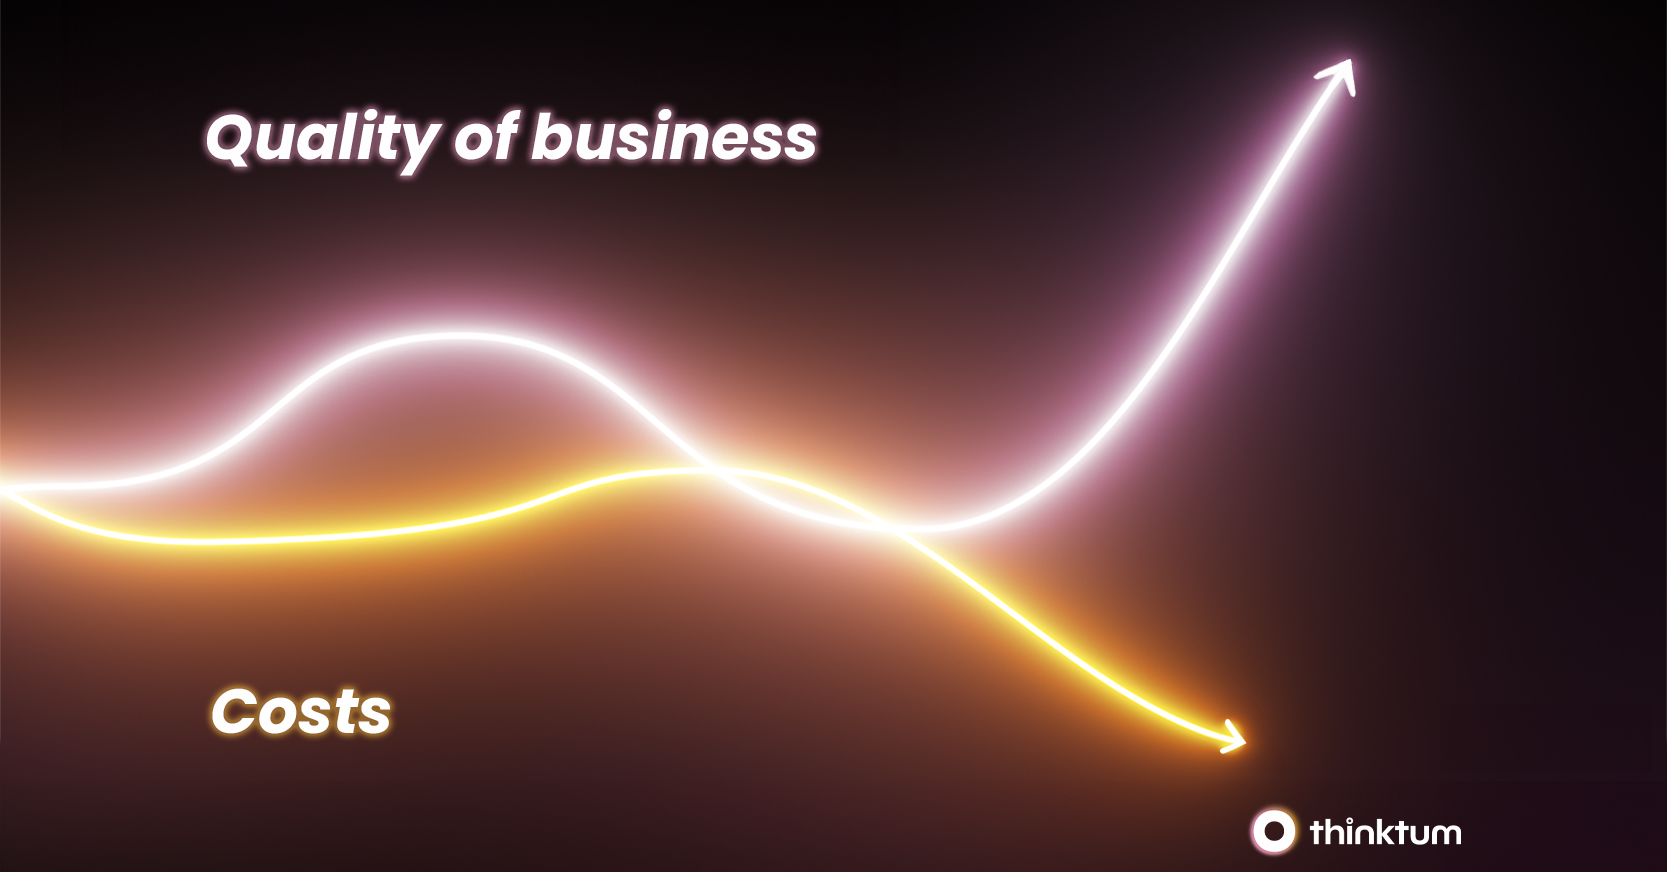 Two neon lines move from left to right. A pink line (Quality of business) has the line showing up while costs in yellow is trending down. With the thinktum logo.